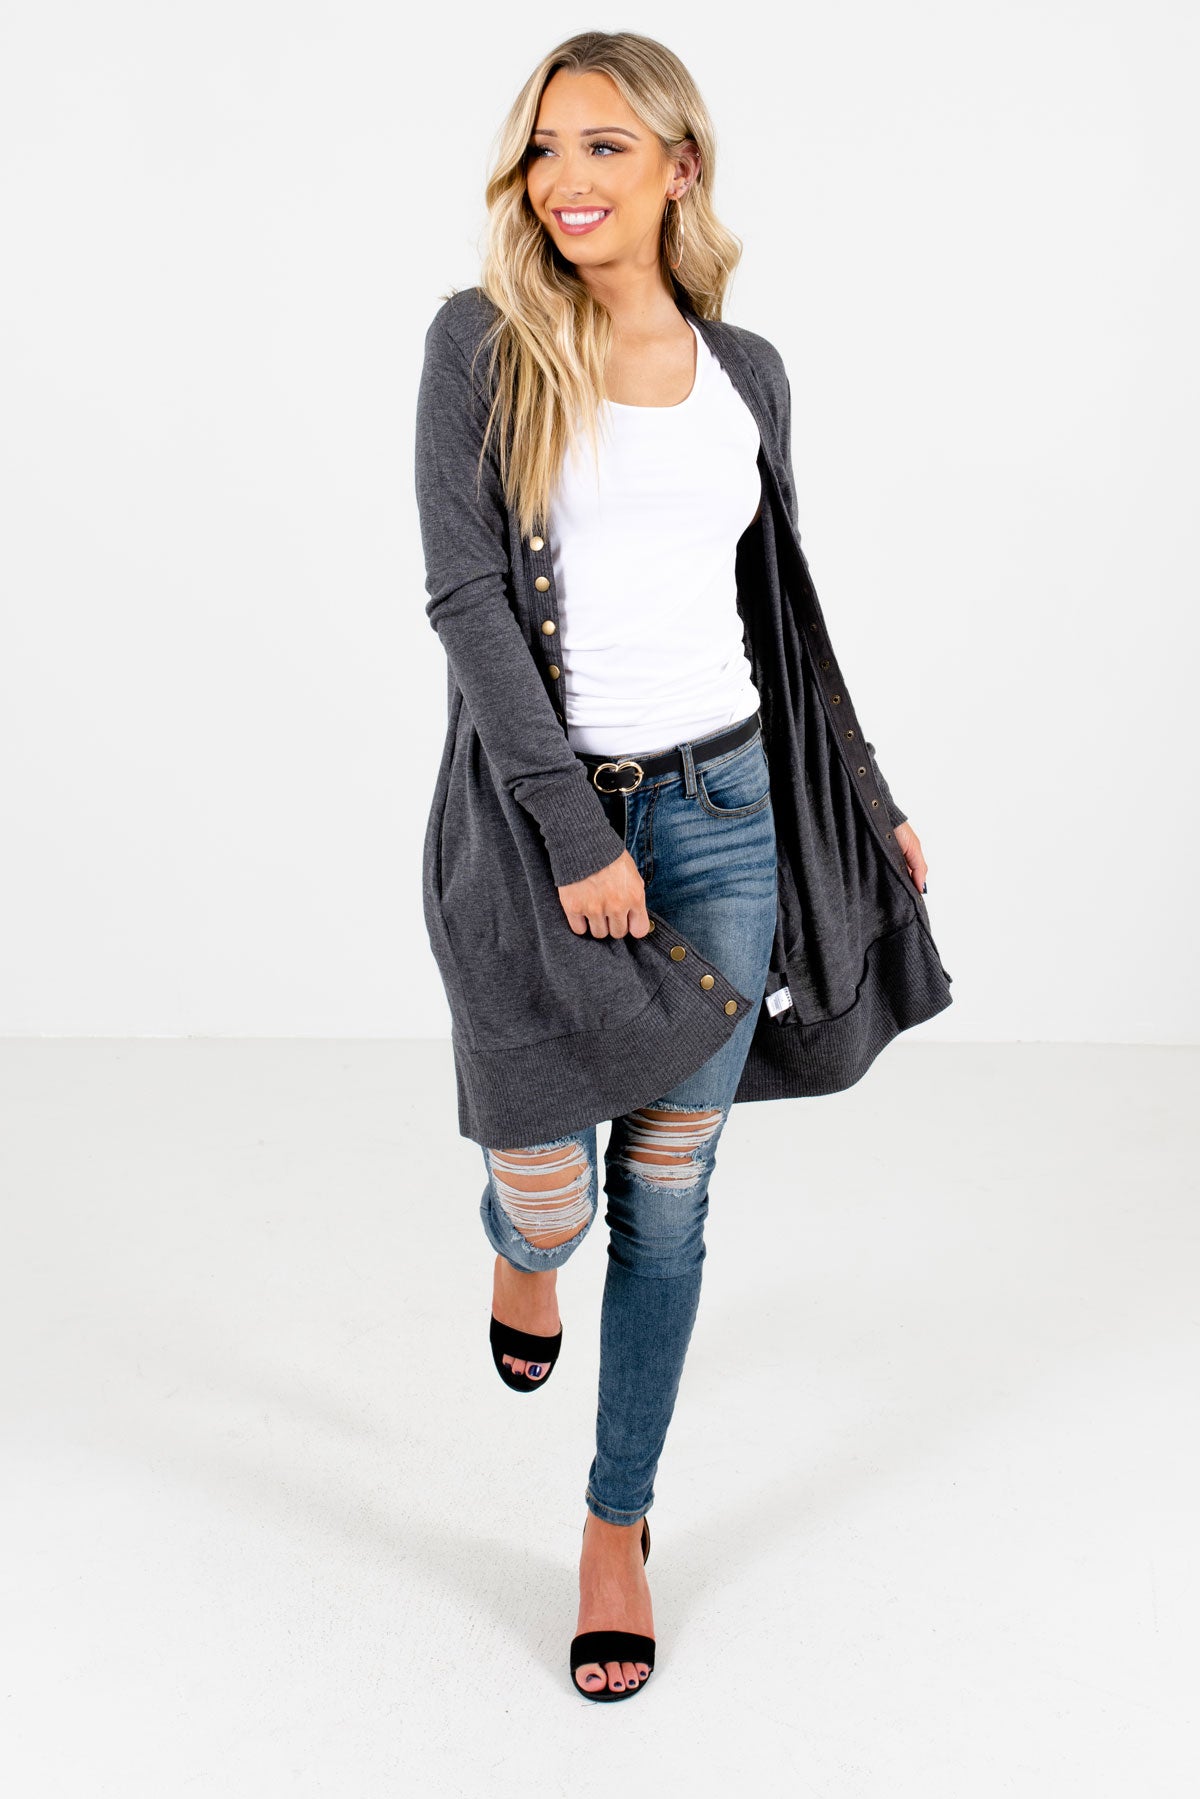 Women's Charcoal Gray Warm and Cozy Boutique Clothing